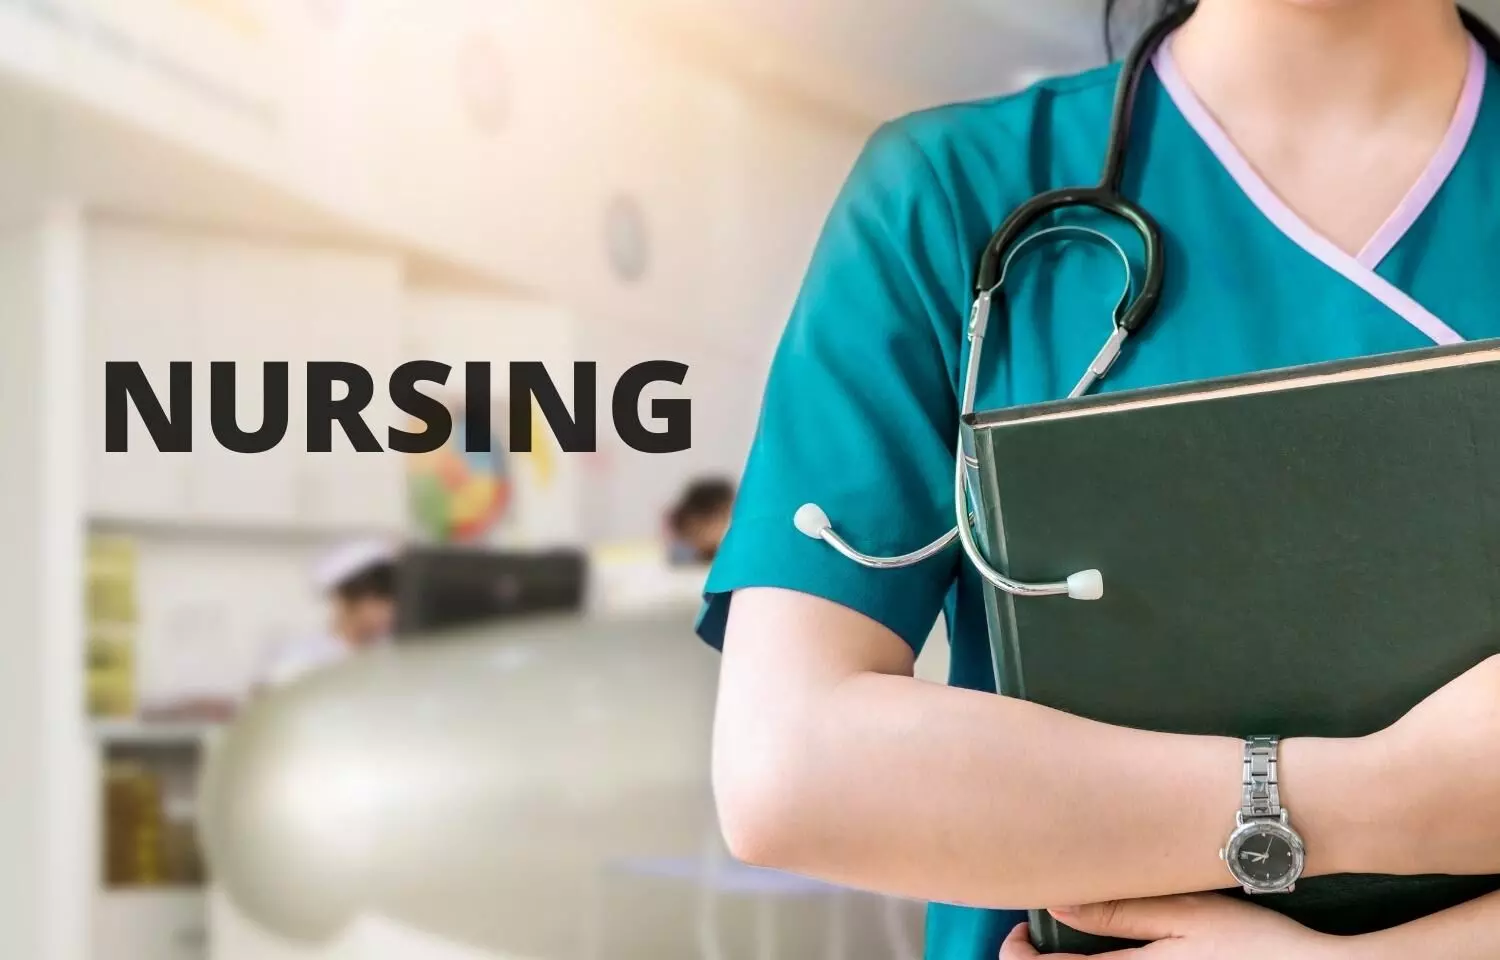 DME Chhattisgarh releases Schedule for BSc Nursing admissions 2021, Details